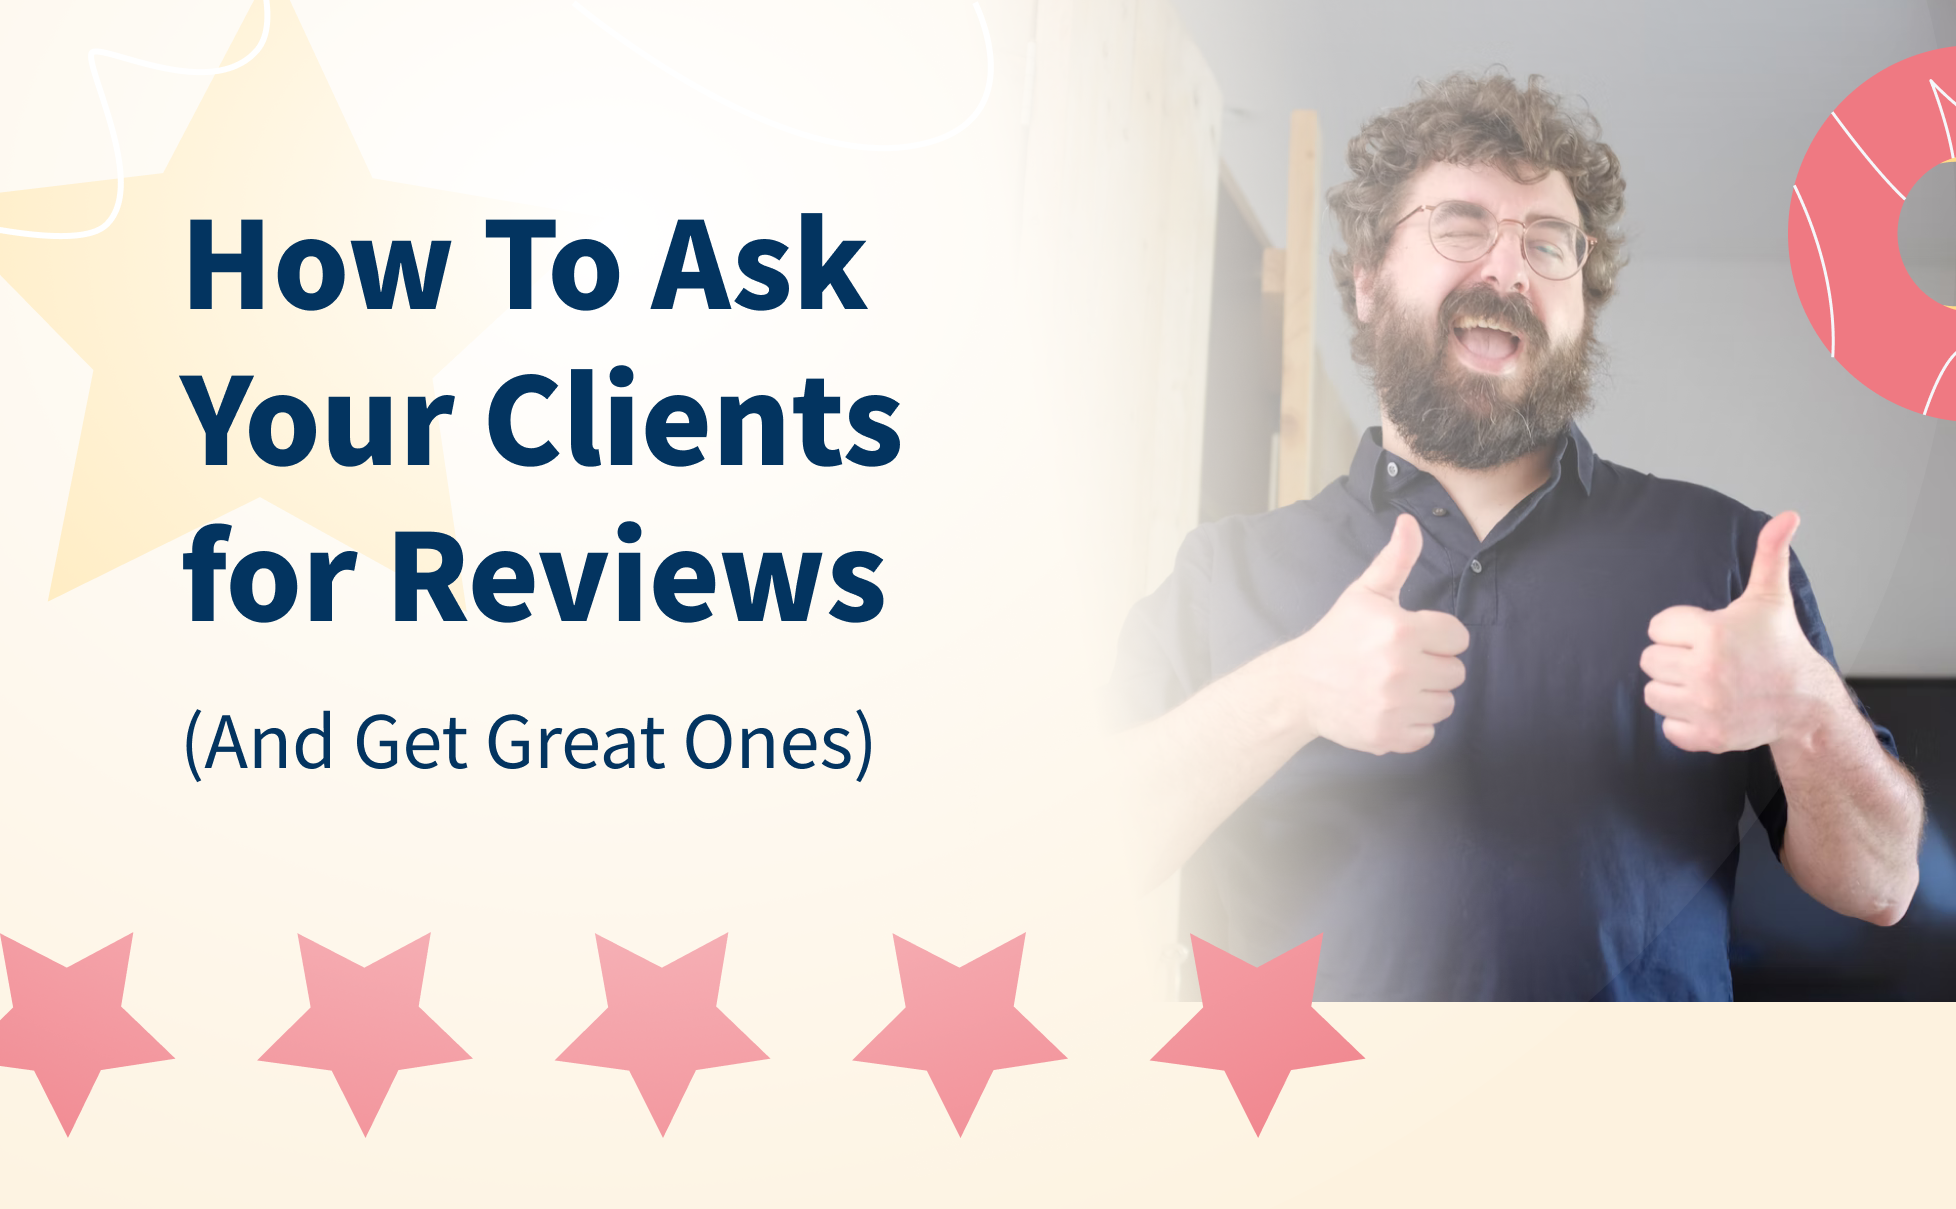 How To Ask Your Clients for Reviews (And Get Great Ones)